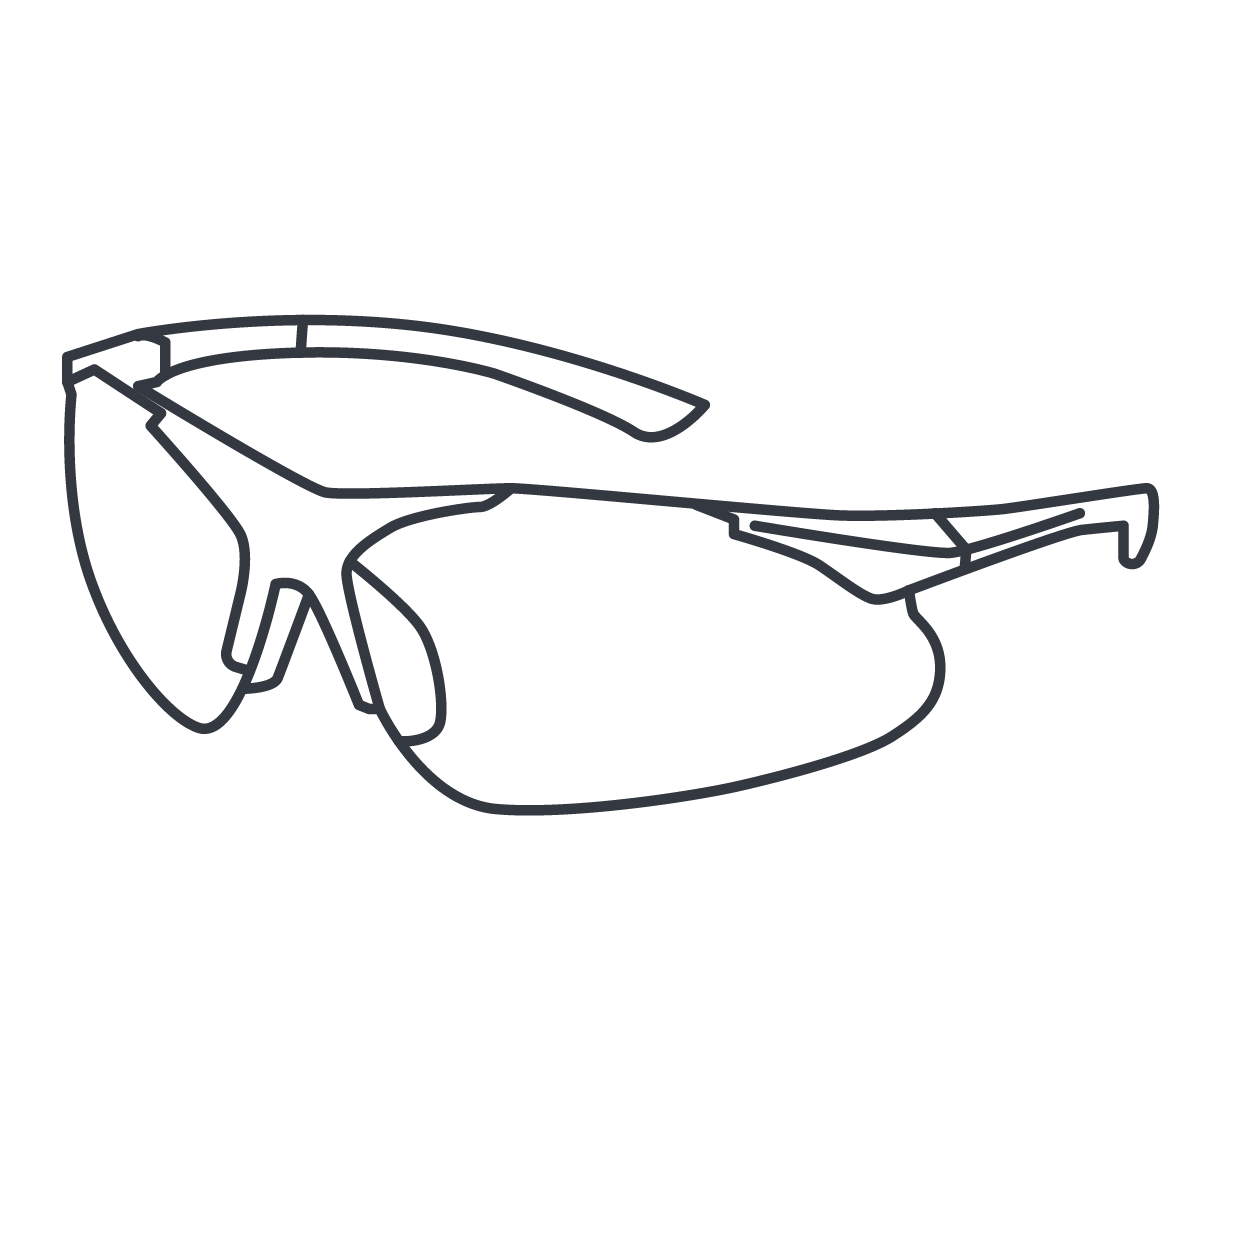 TS-Tool-Illustrations_Safety-Glasses.png